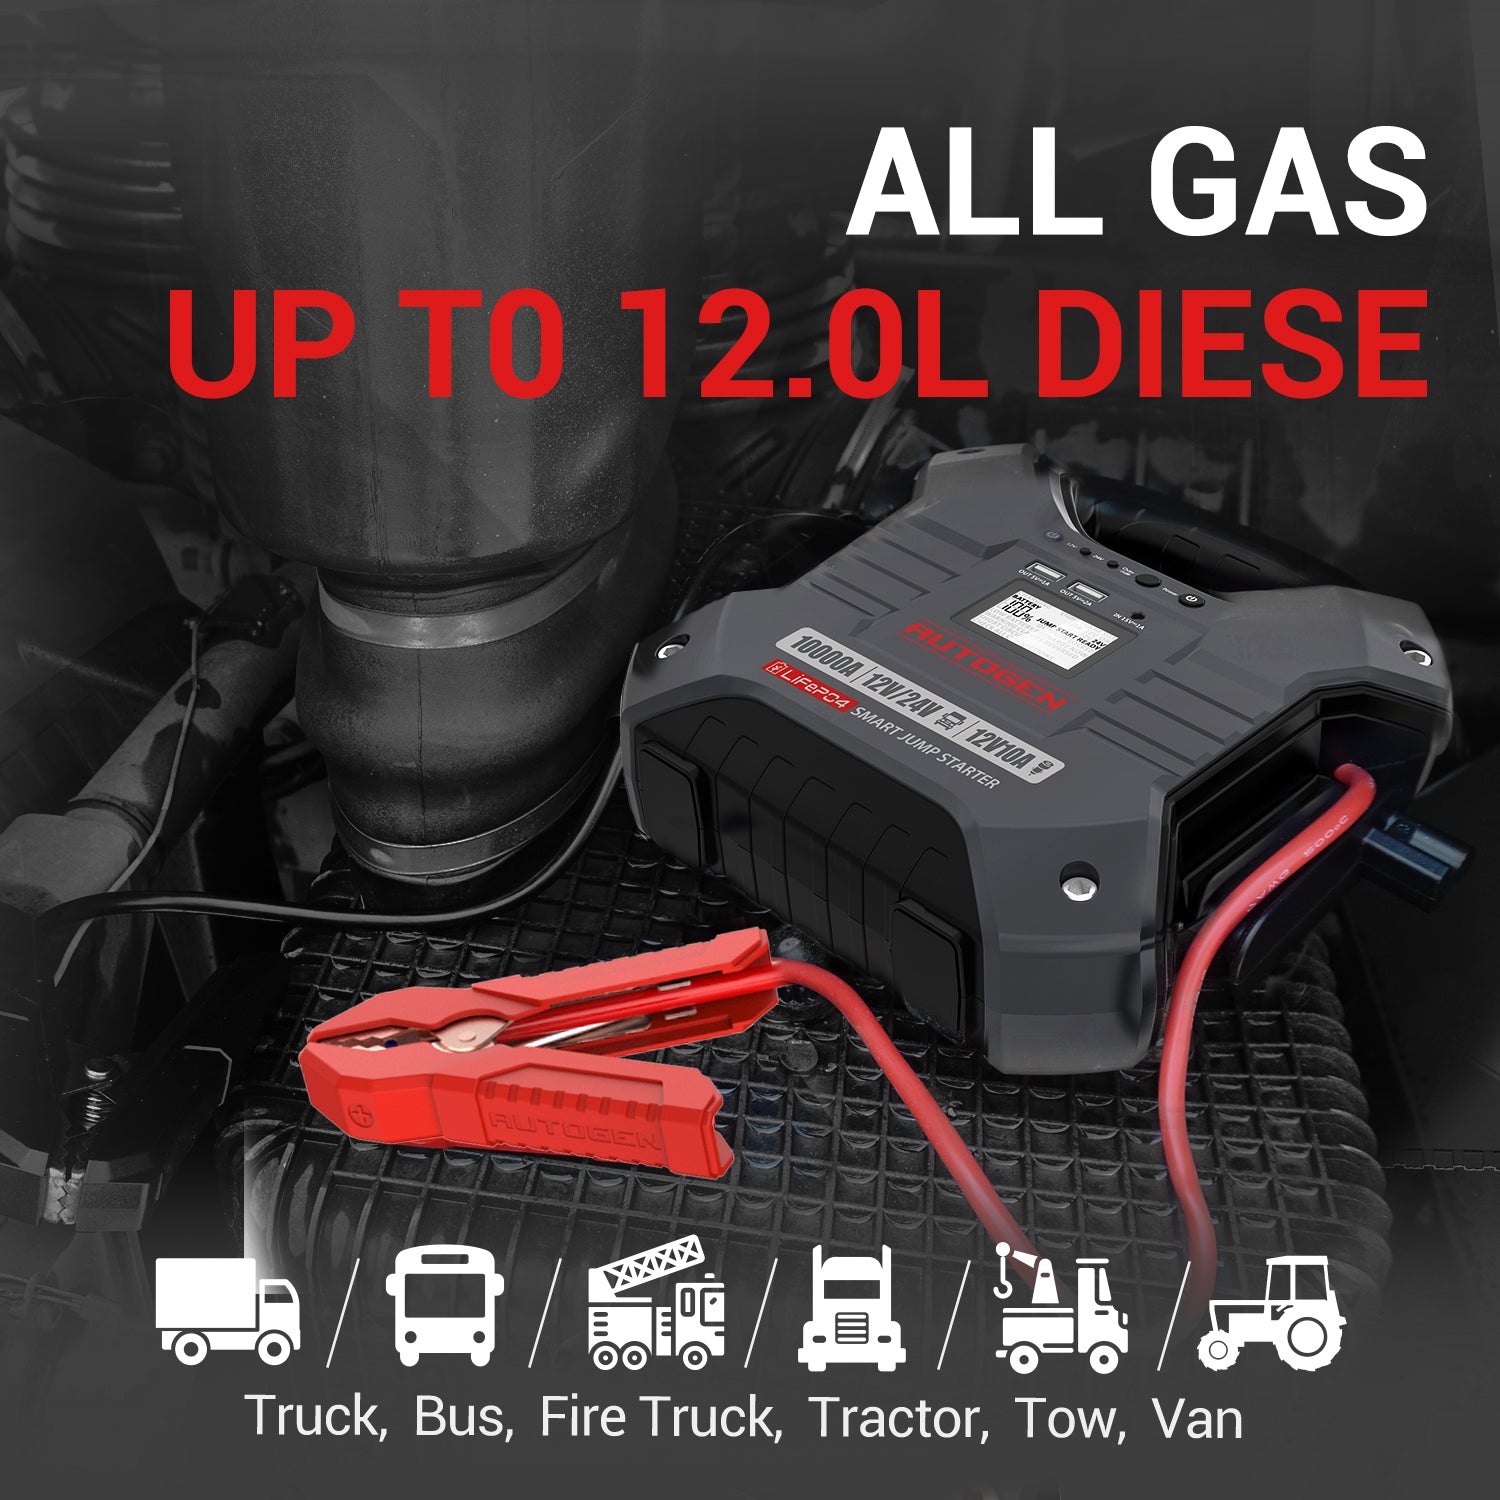 4000 Amp with lithium battery car battery charger jump starter 12v 24v 40a  for heavy duty truck